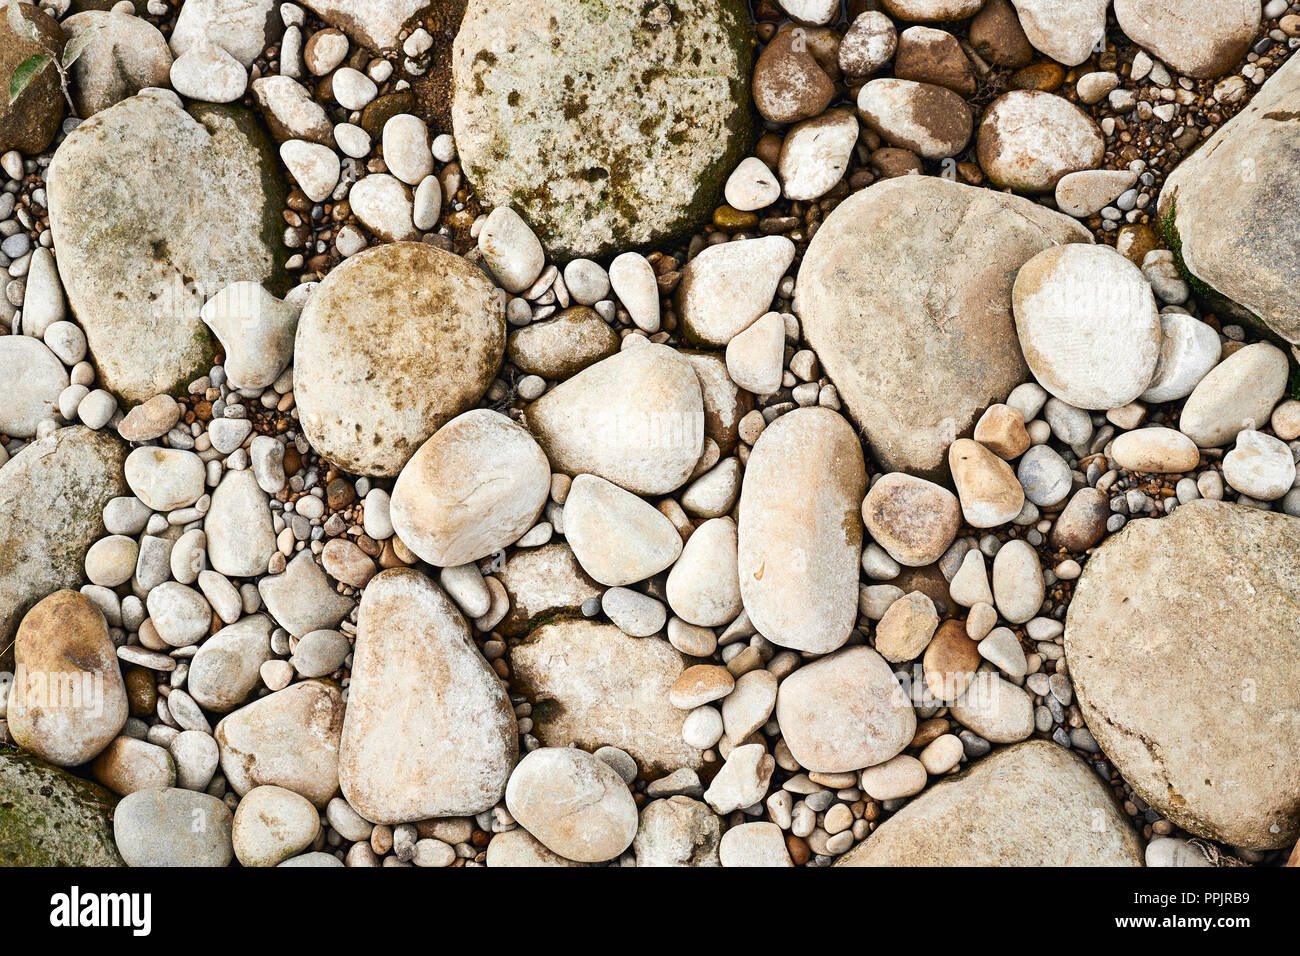 Riverbed pebbles, warm tone background image. Stock Photo